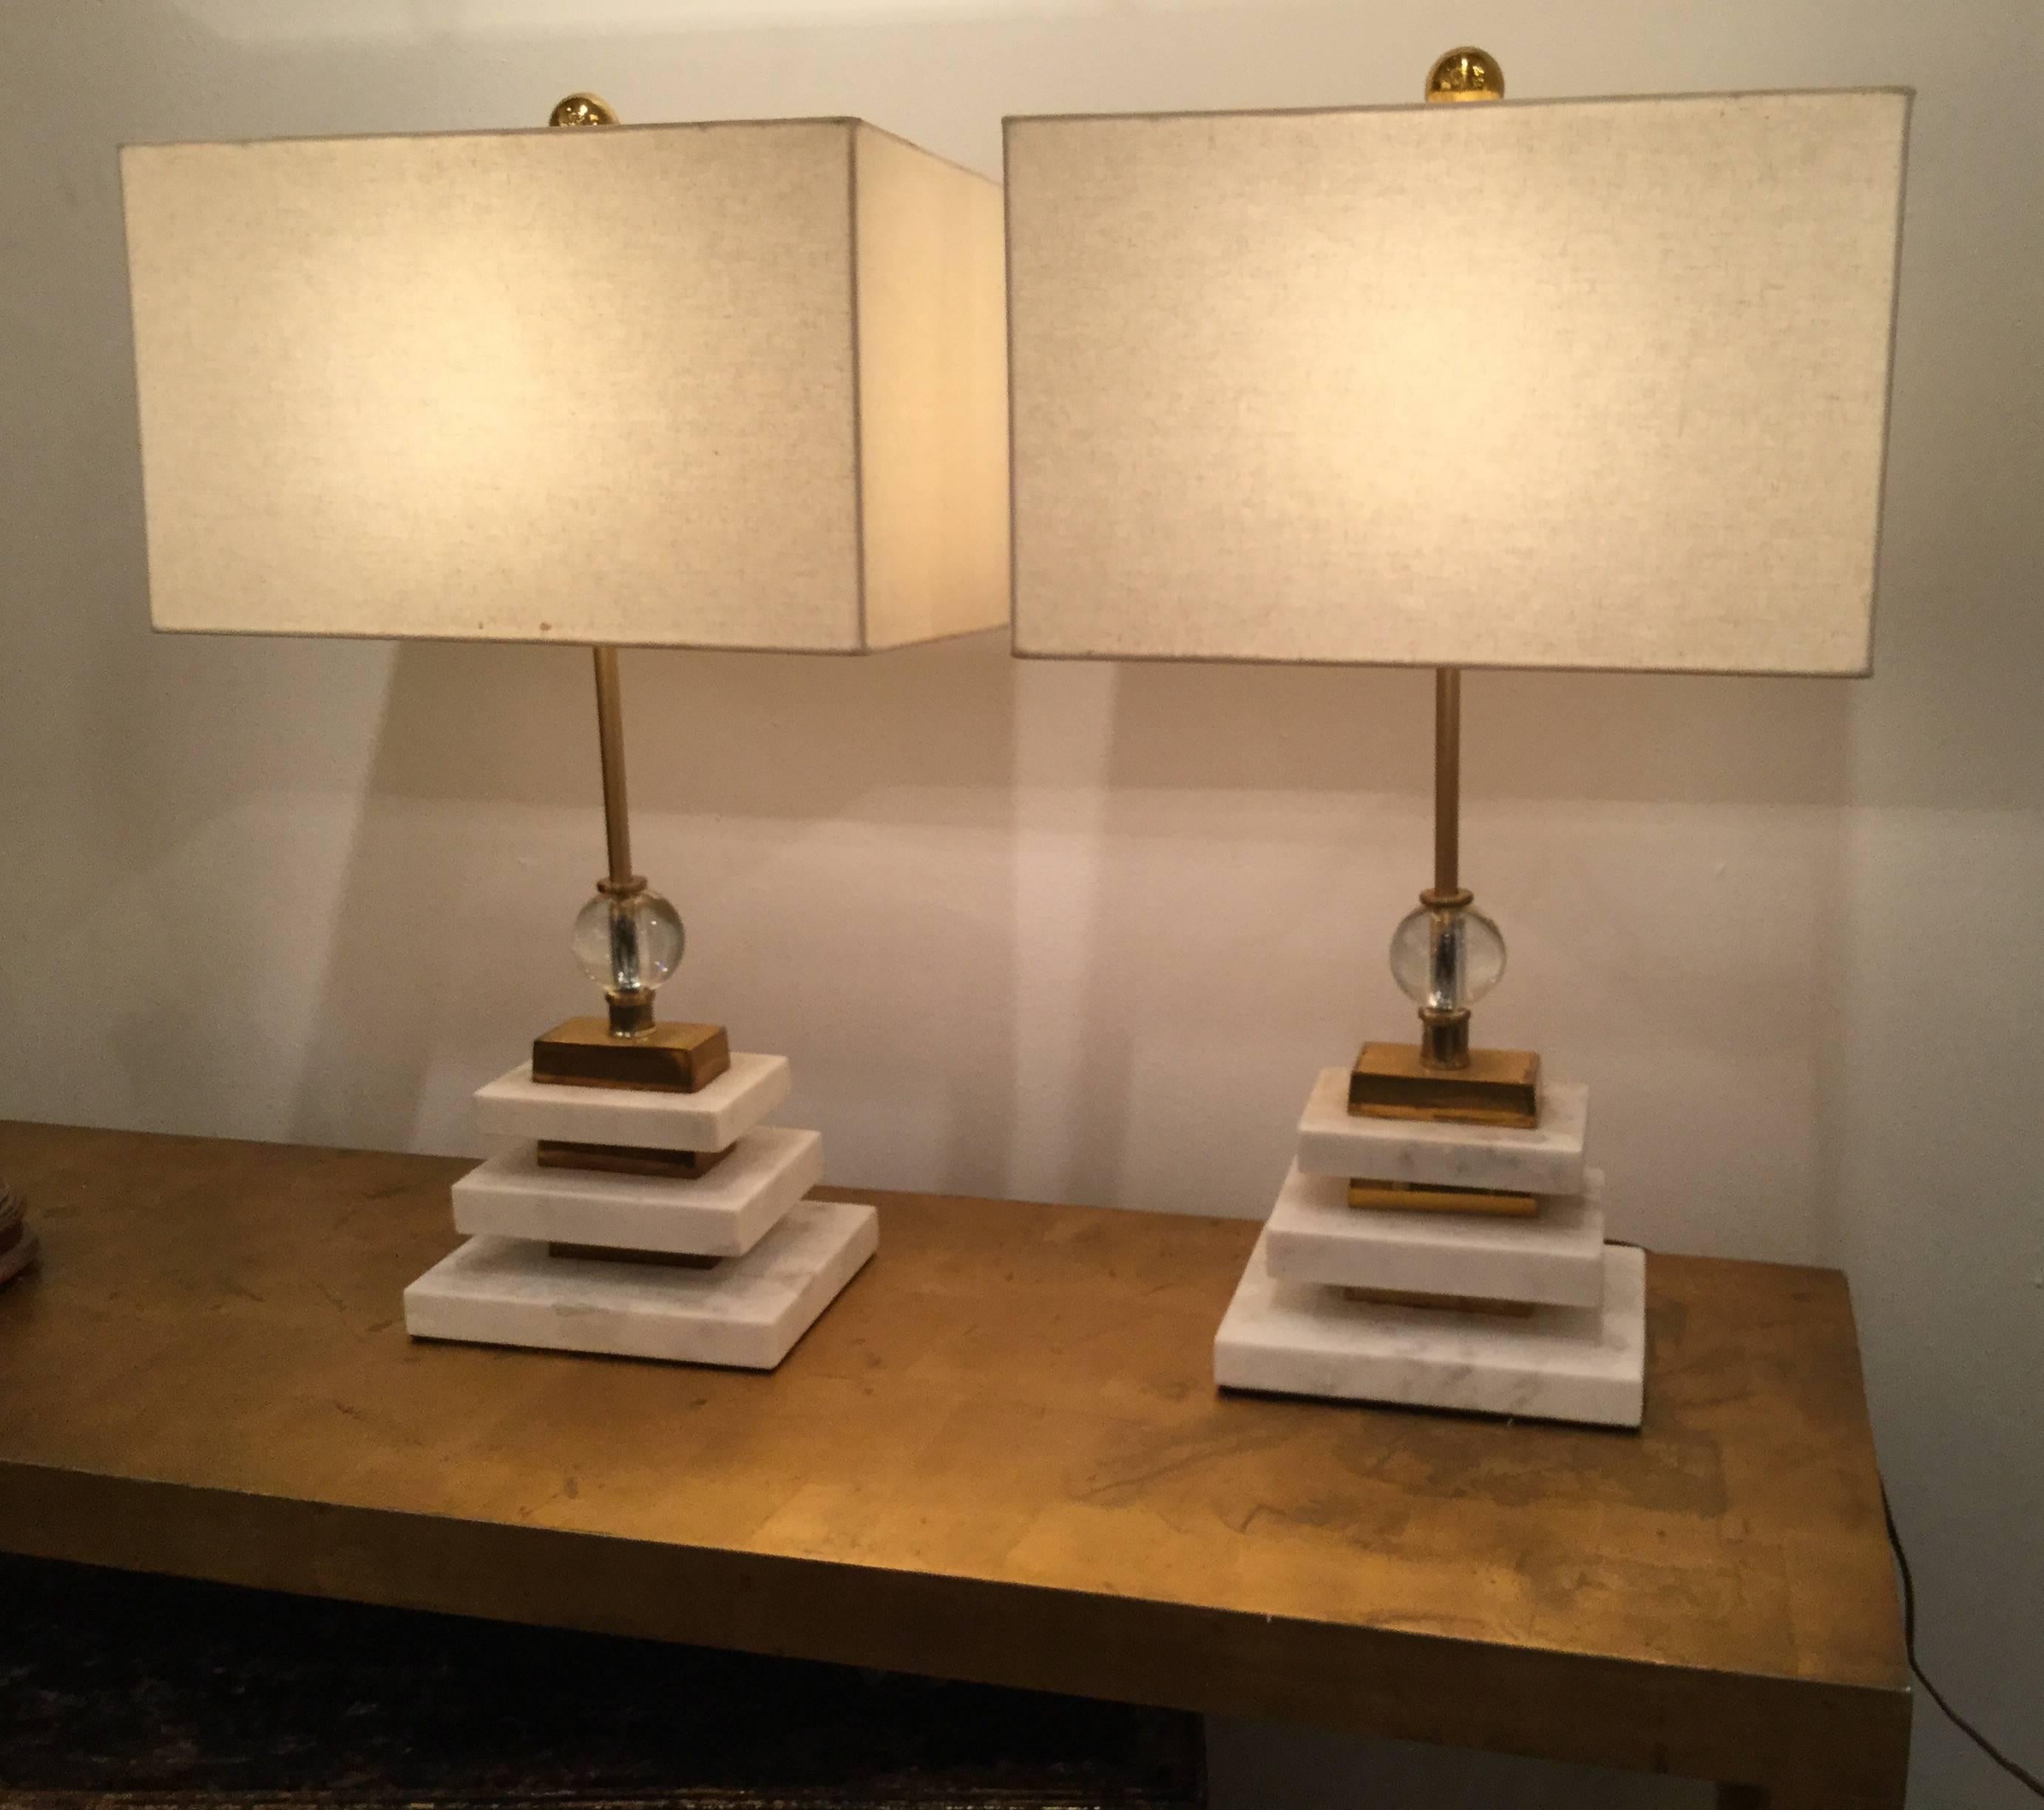 Pair of French Art Deco geometric style white marble table lamps with brass inserts between the marble and glass spheres at the top. Excellent quality, with original shades.